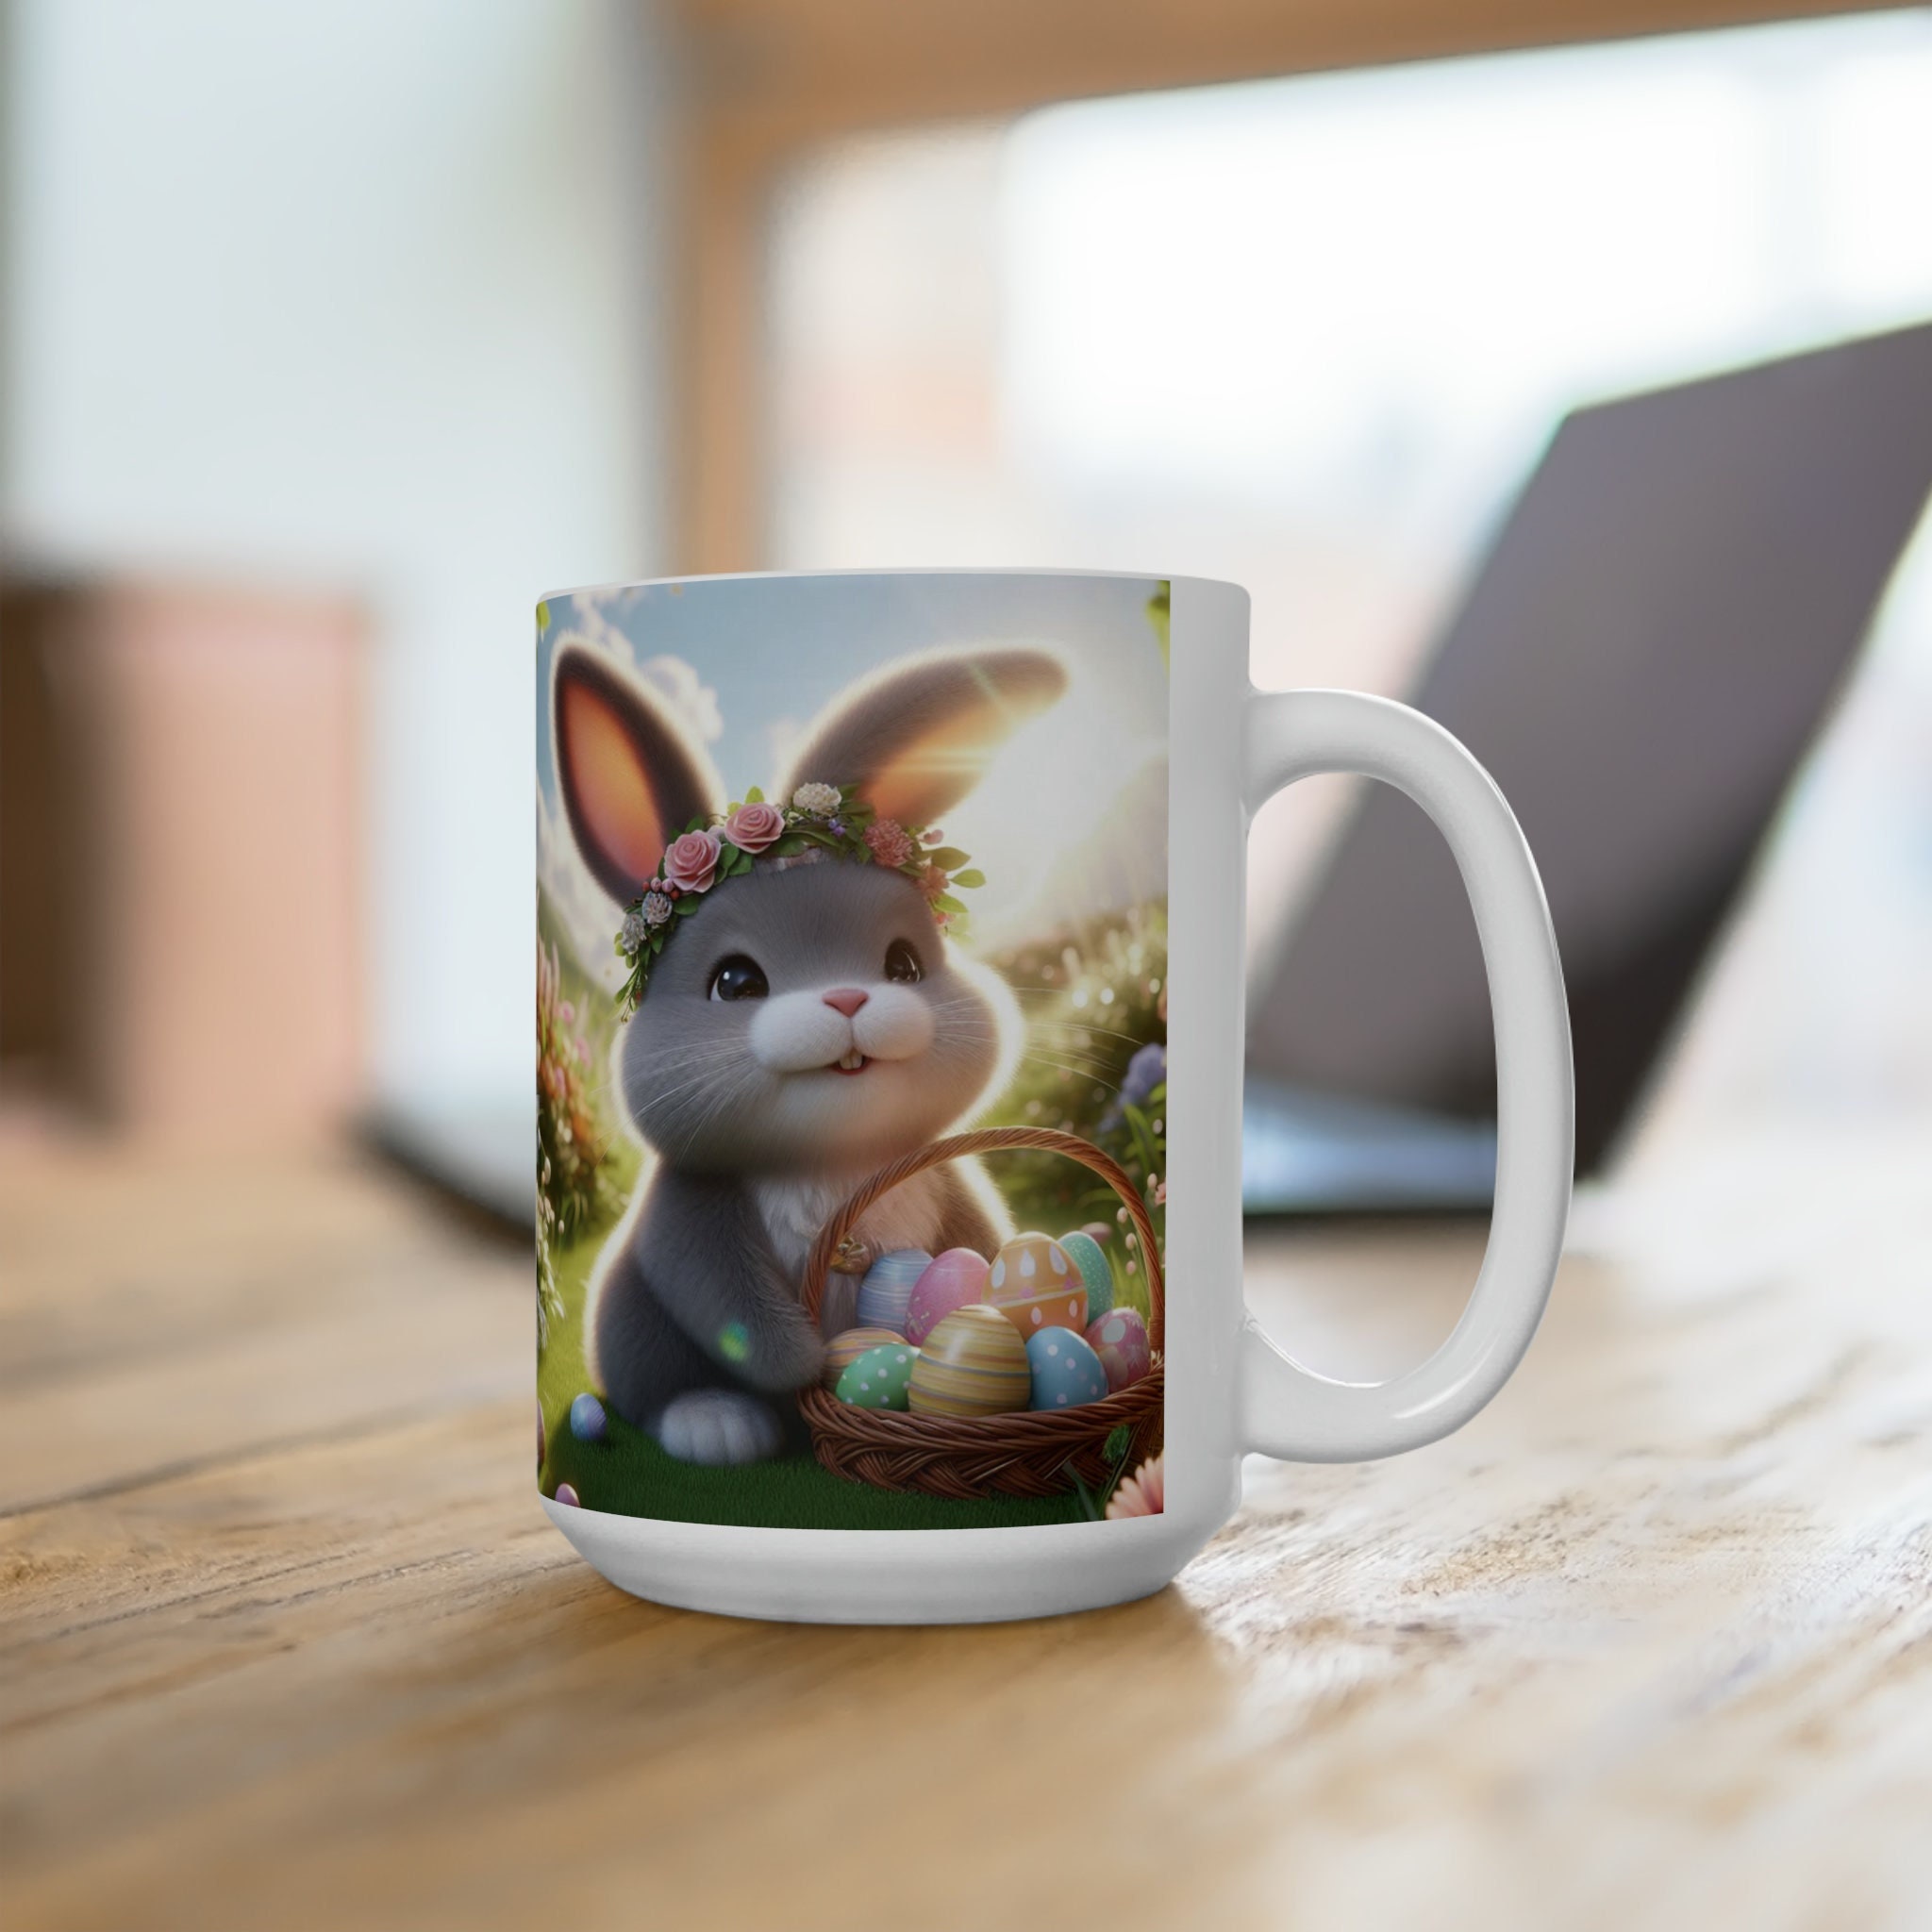 Discover Ceramic Mug for Your Morning Coffee, Happy Easter Gift